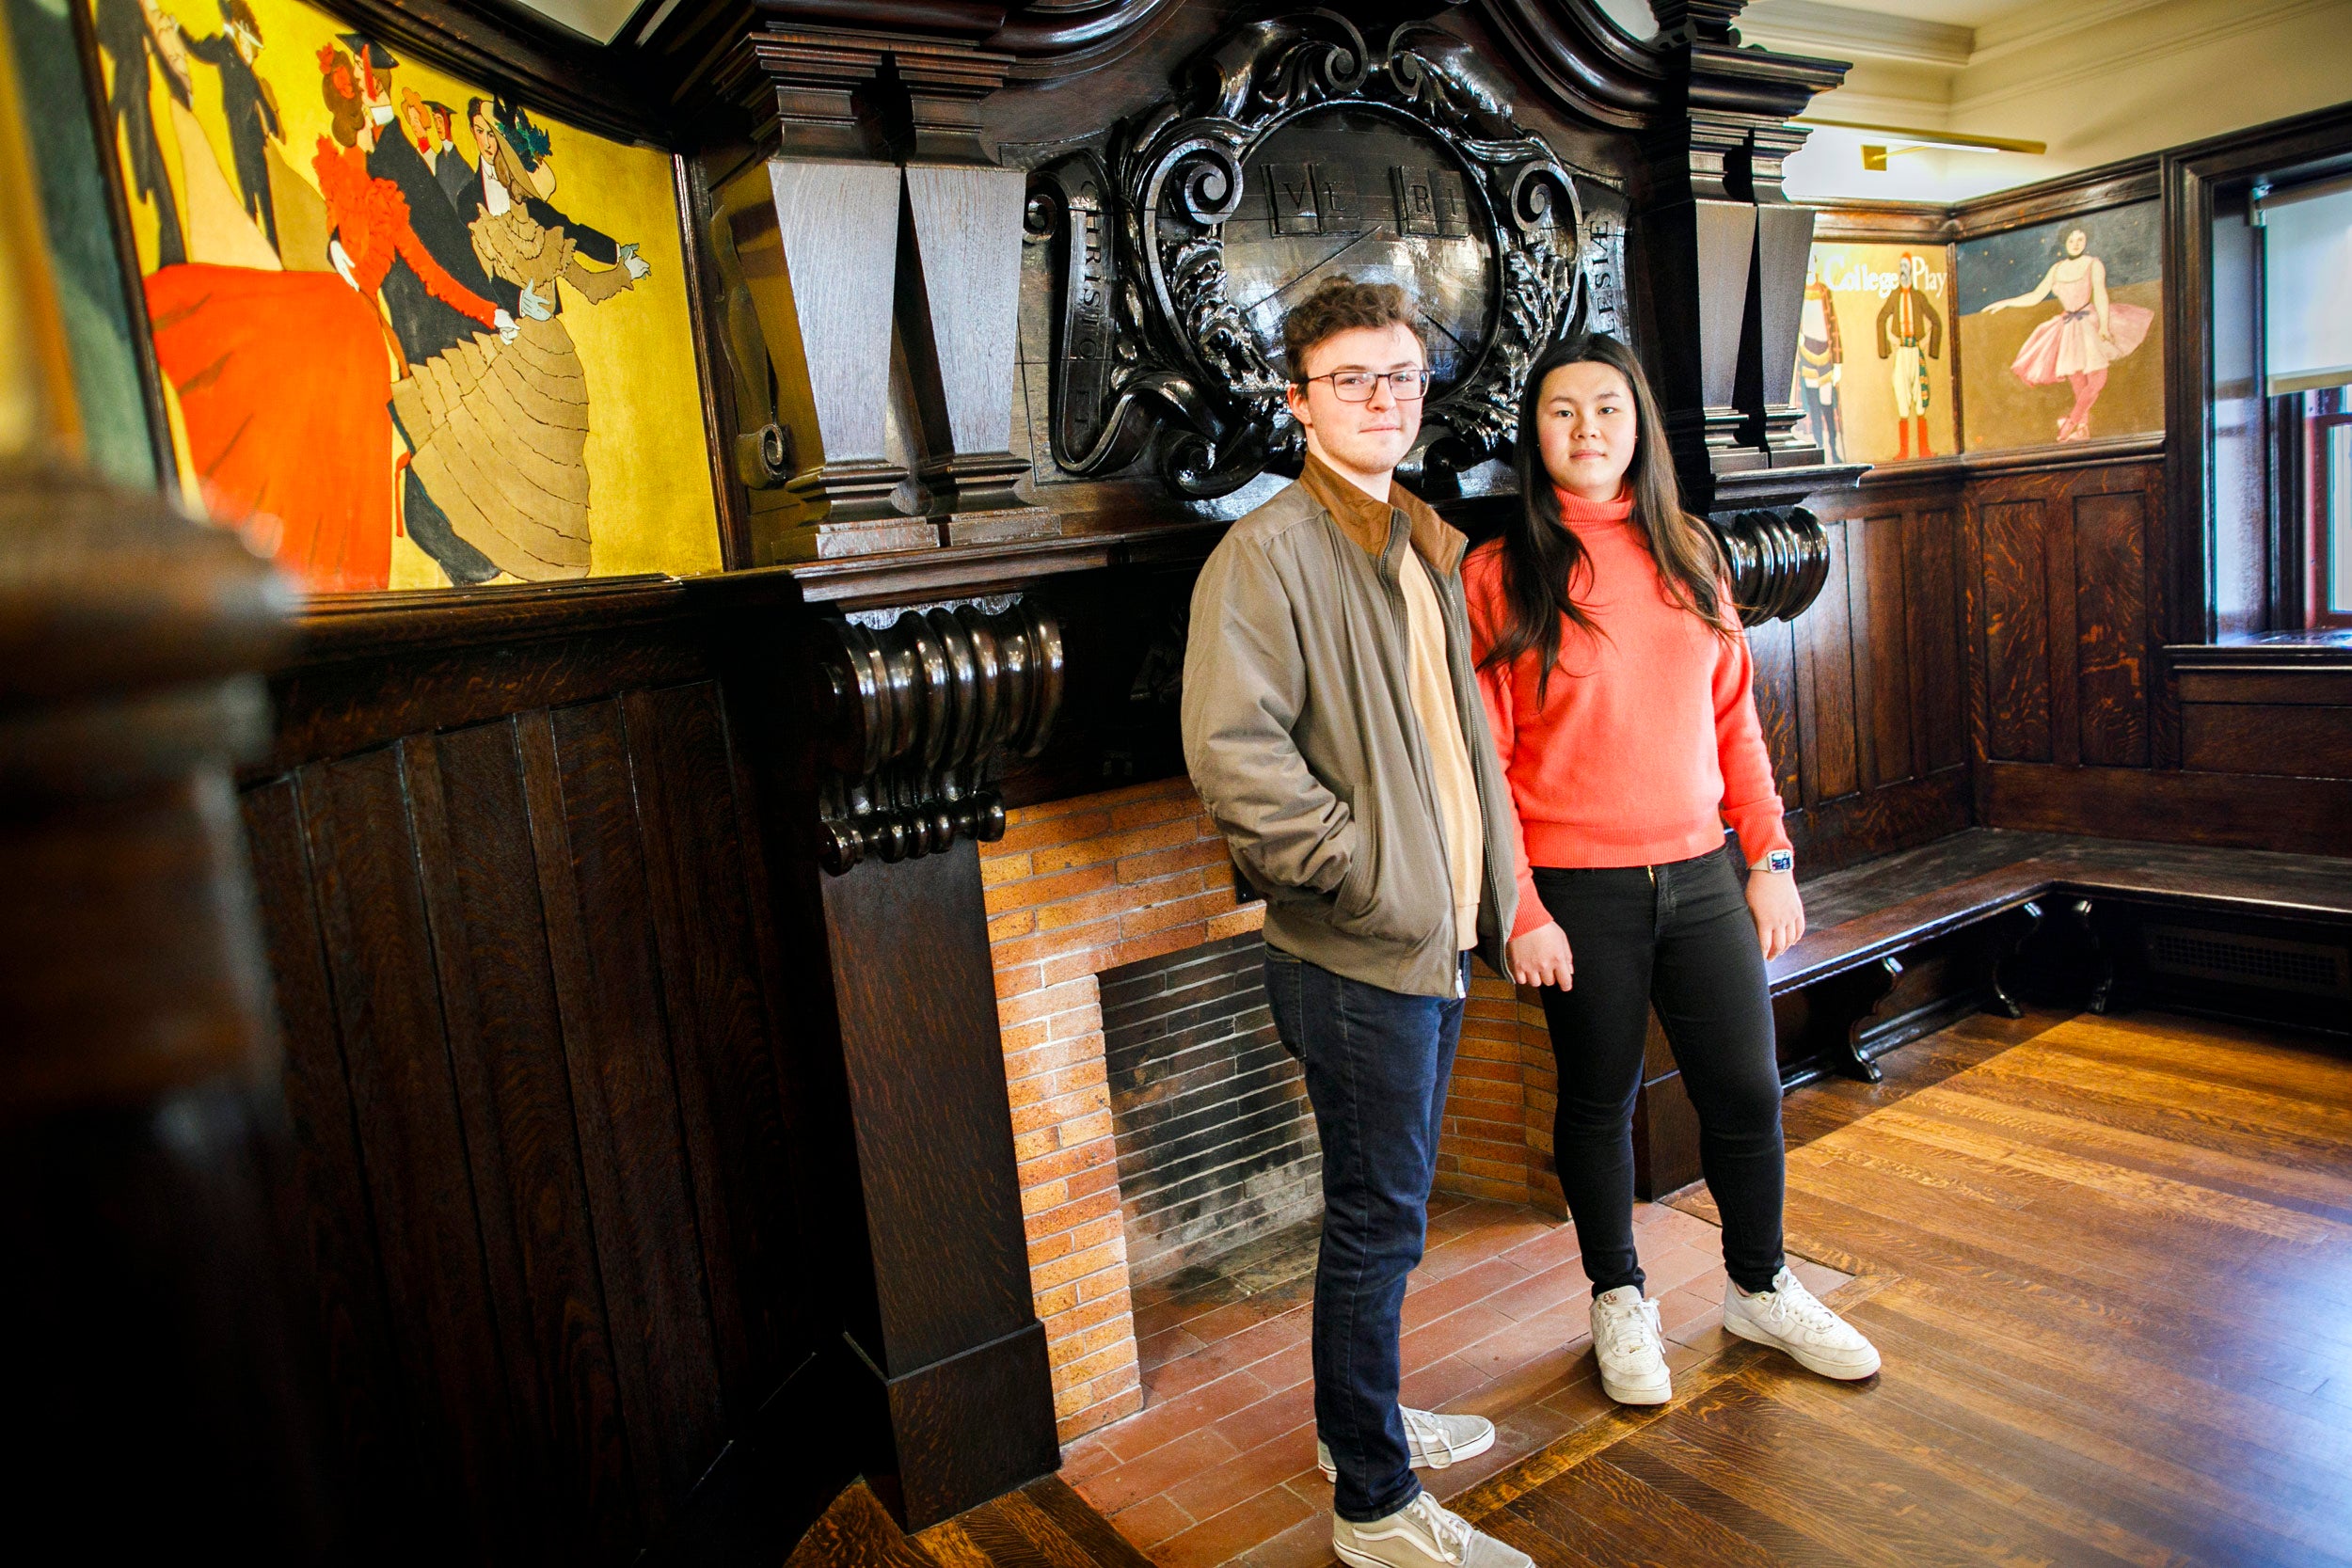 Adams House’s House Committee Chairs (aka HoCos) Lily Liu and Tate Underwood share their favorite aspects of their student residence. Tate Underwood (left) and Lily Liu are pictured in the Coolidge Room by a fireplace decorated with a wooden carved veritas shield at Adams House.